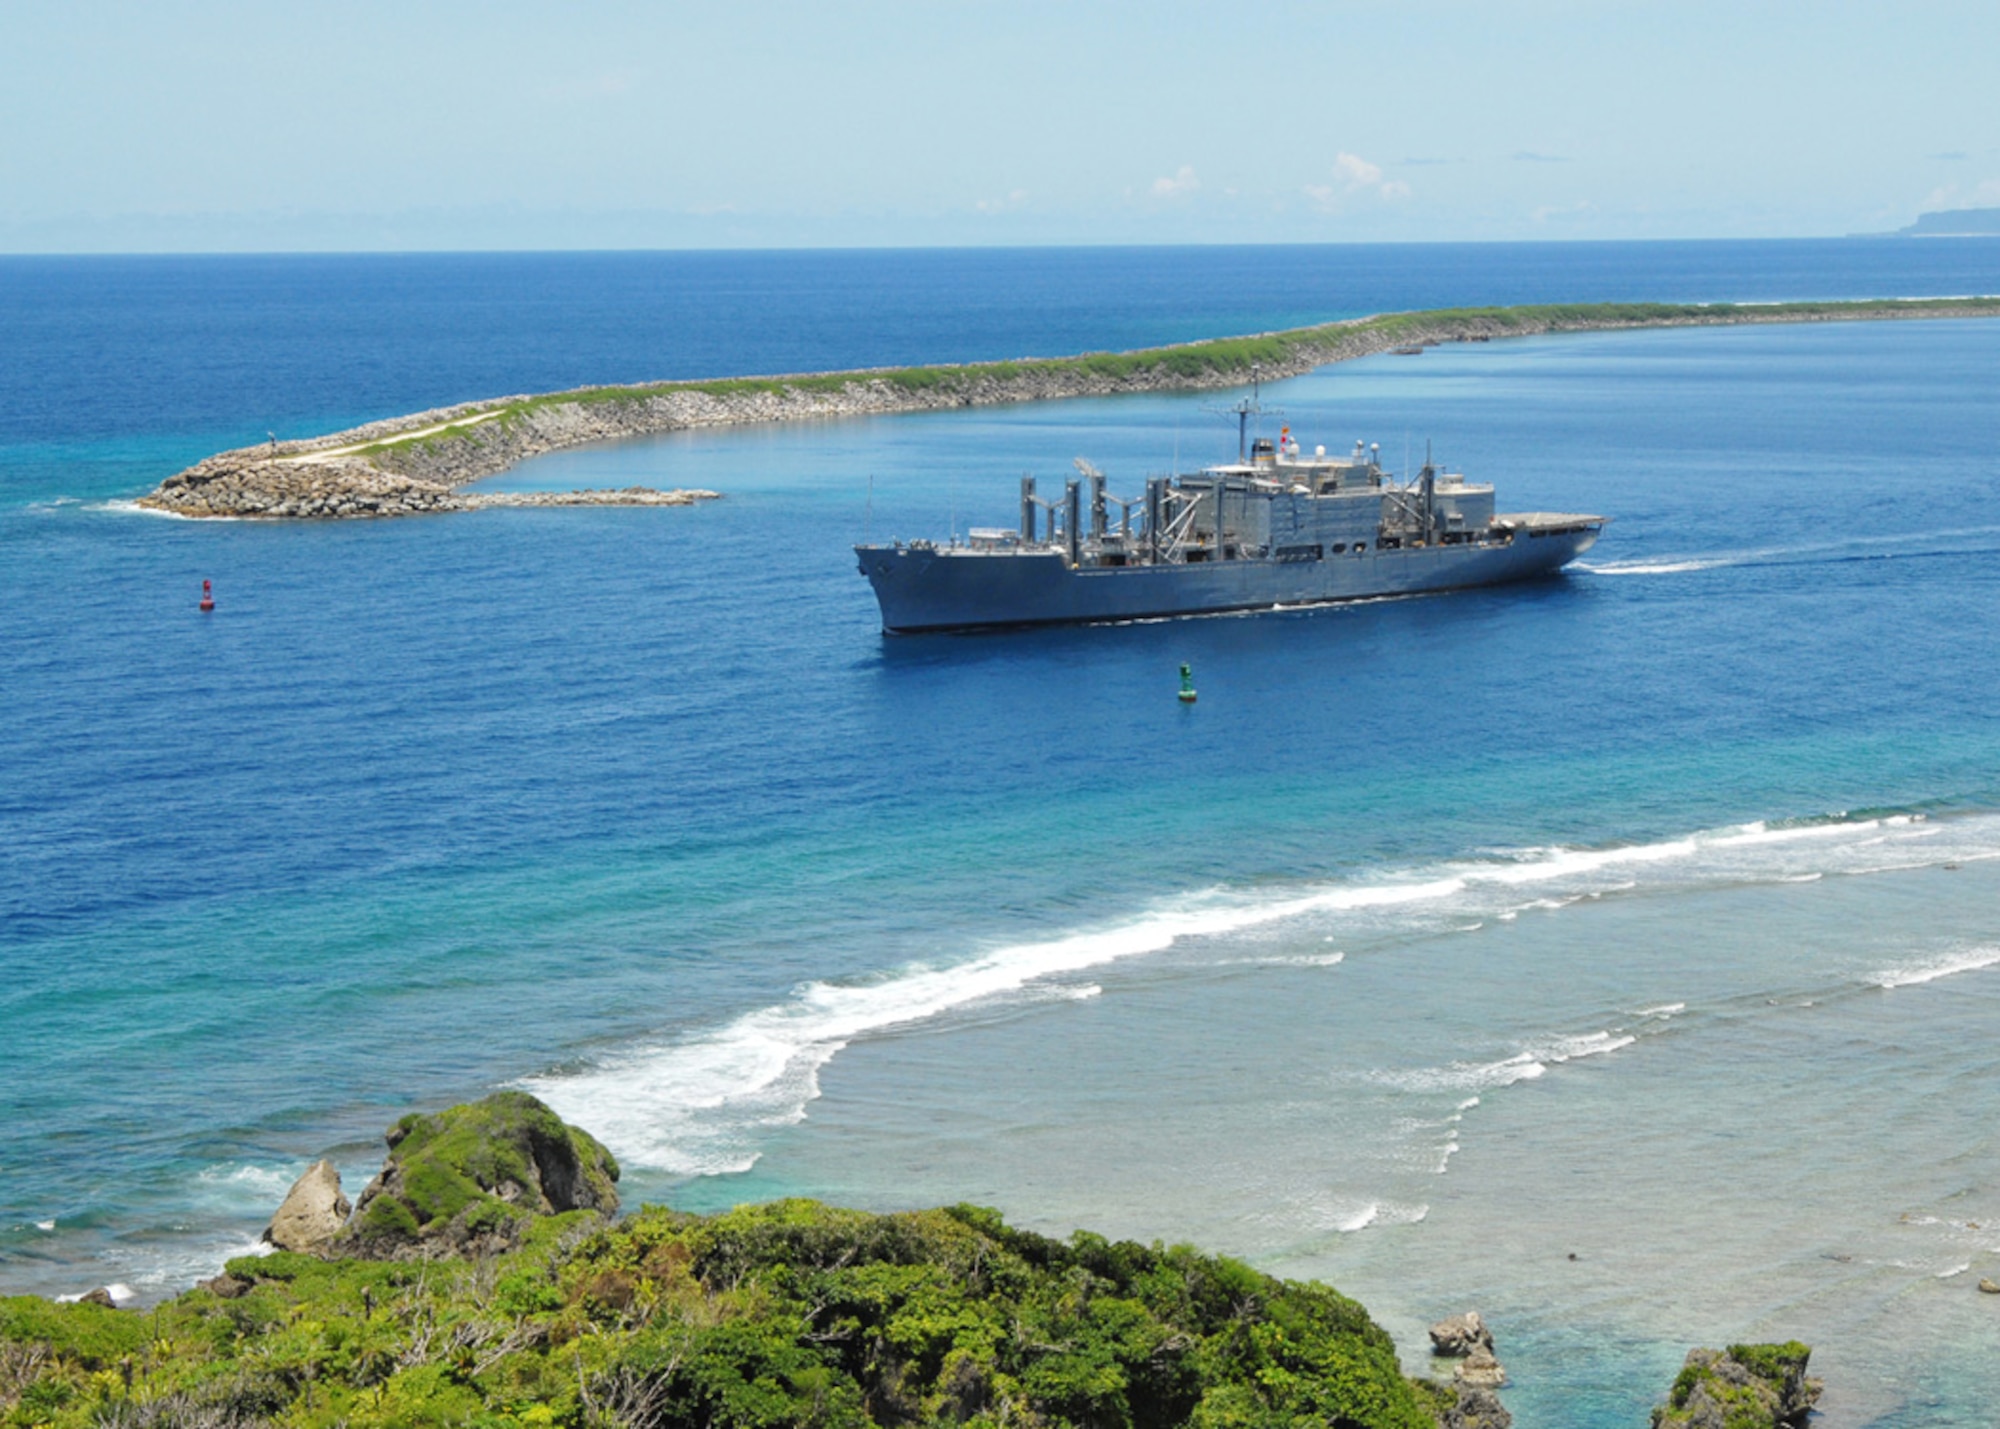 The USNS San Jose sails out of Guam's Apra Harbor Sept. 4 to begin its 1,500-mile journey to Wake Island. Onboard the San Jose were members of the 36th Contingency Response Group and the Navy Helicopter Sea Combat Squadron 25, both of Andersen Air Force Base, Guam, to make the initial assessment of damage left by Super Typhoon Ioke. (U.S. Navy photo/Petty Officer 2nd Class John F. Looney)